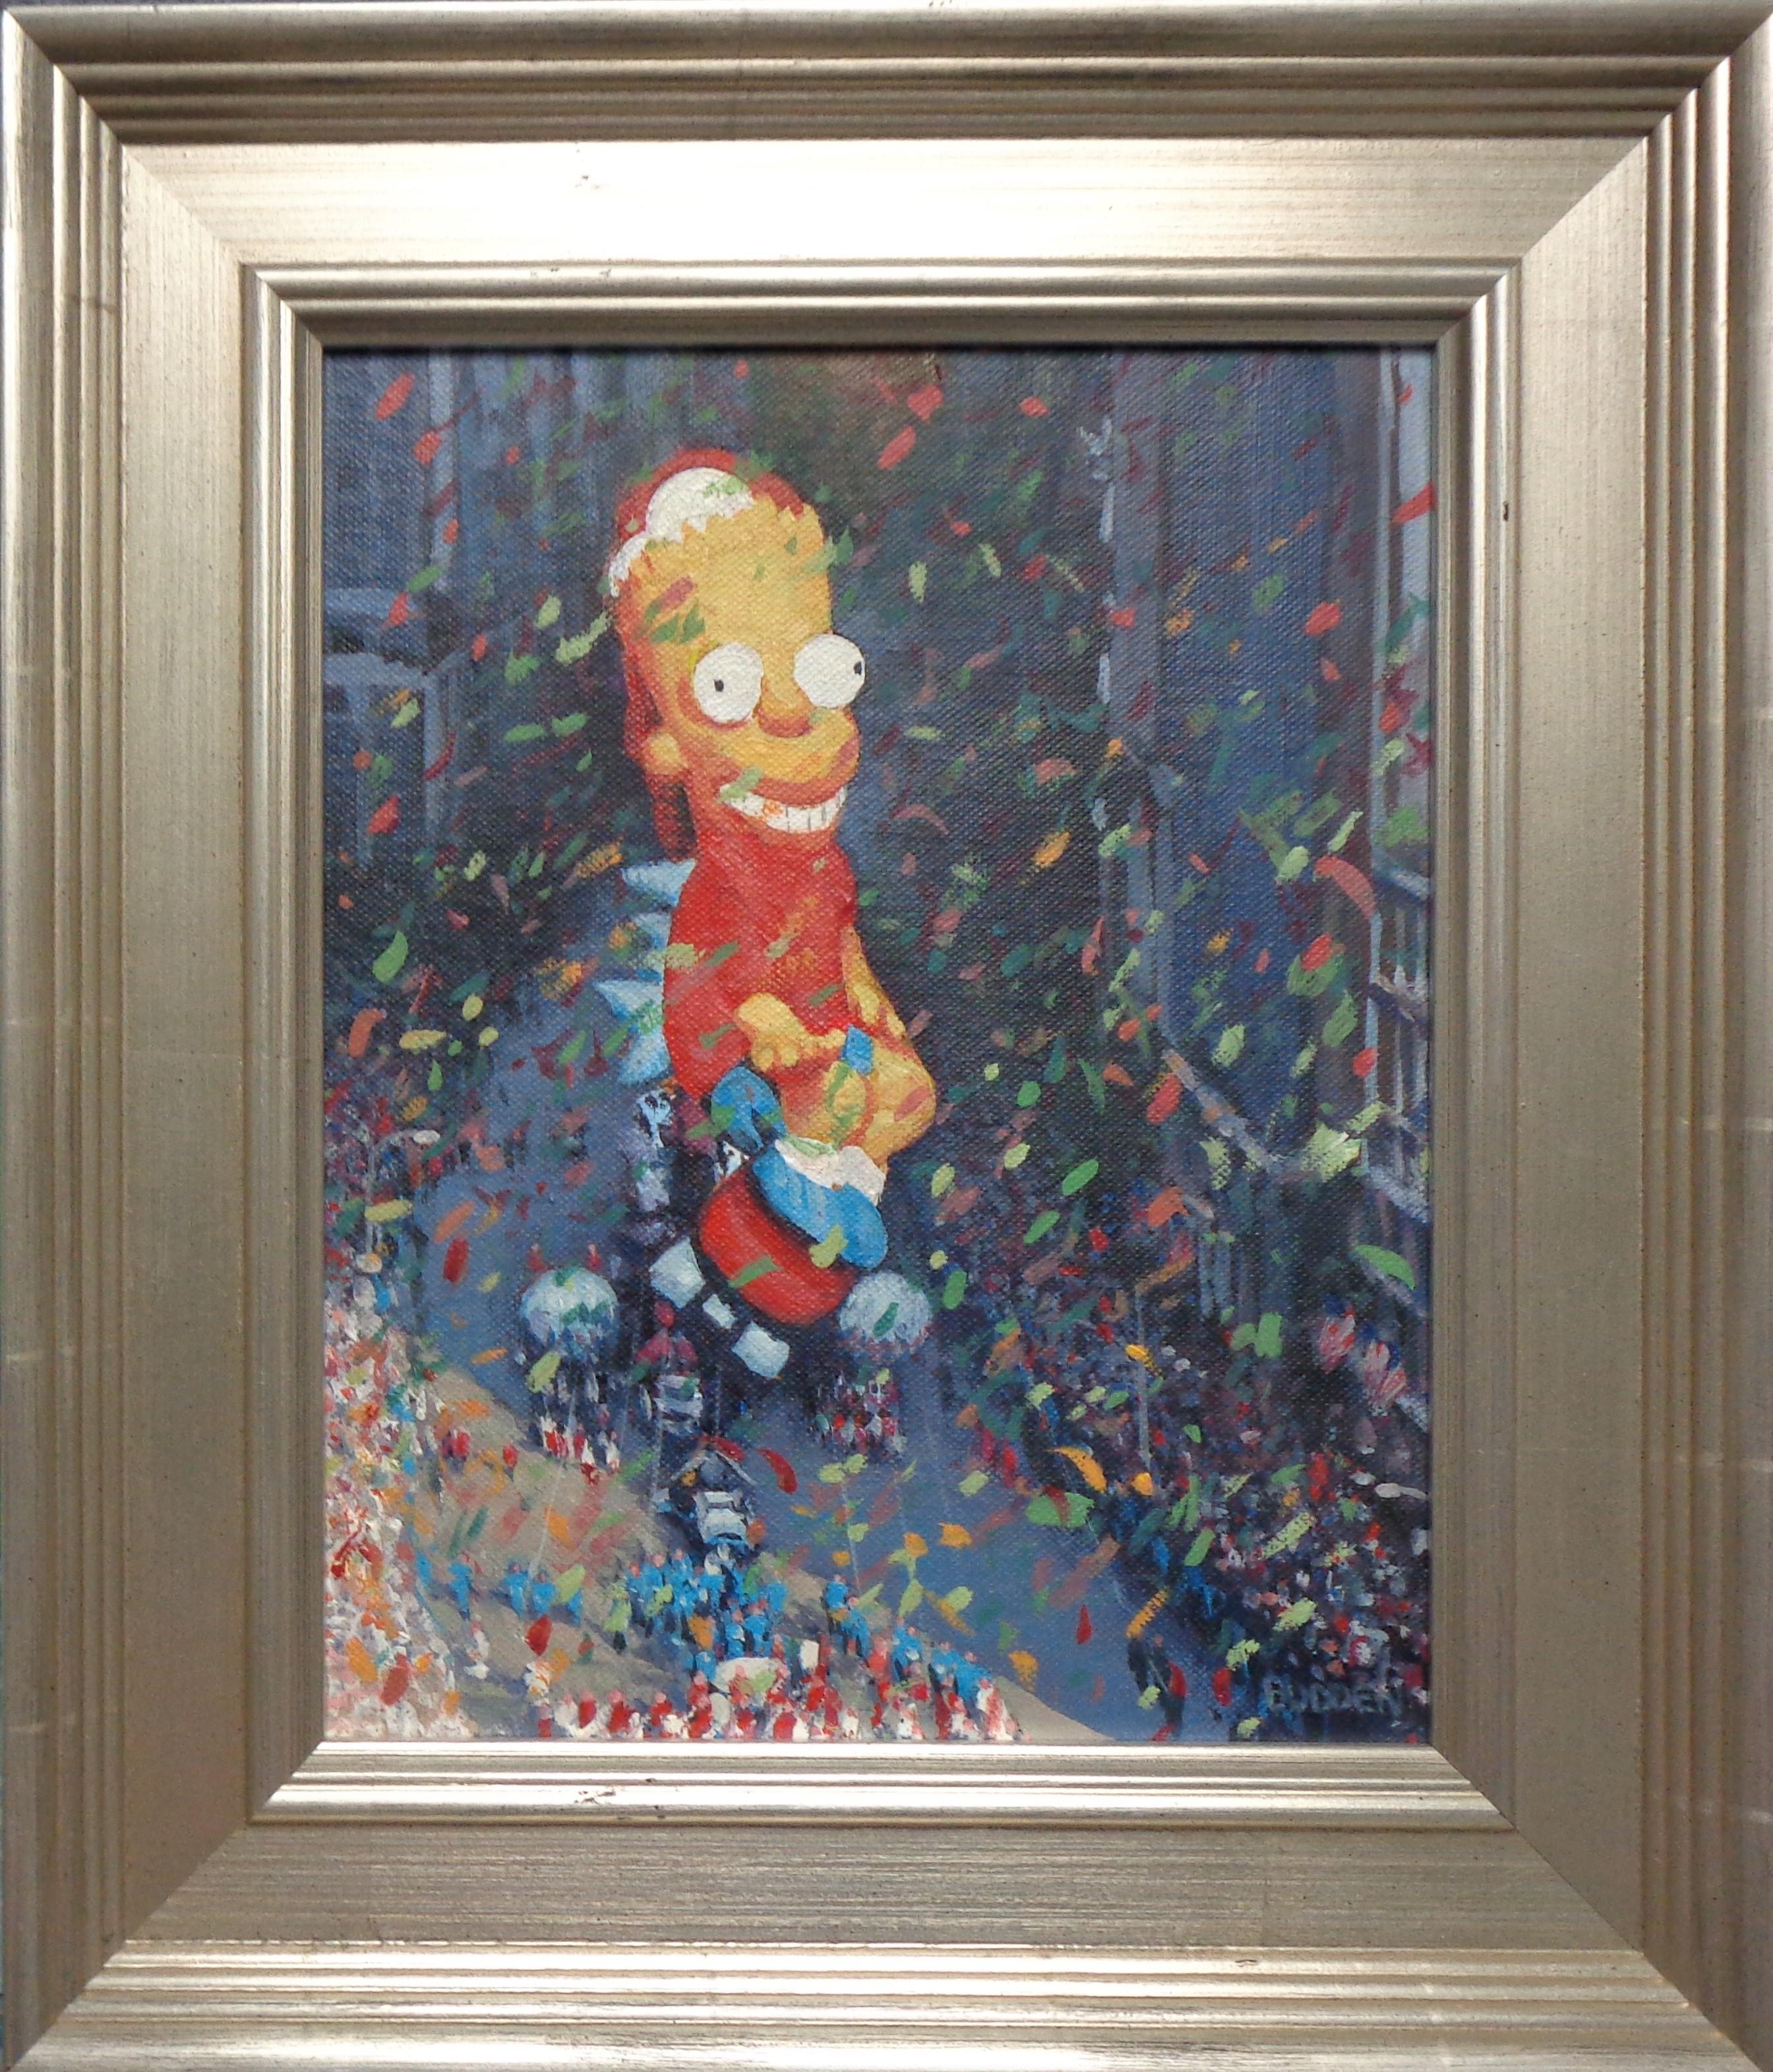 Macy's Bart Simpson
Part of a series of 11 paintings.
An oil painting on canvas panel by award winning contemporary artist Michael Budden that showcases images from the Macy's Thanksgiving Parade, NYC. The image measures 10 x 8 unframed and 13.75 x